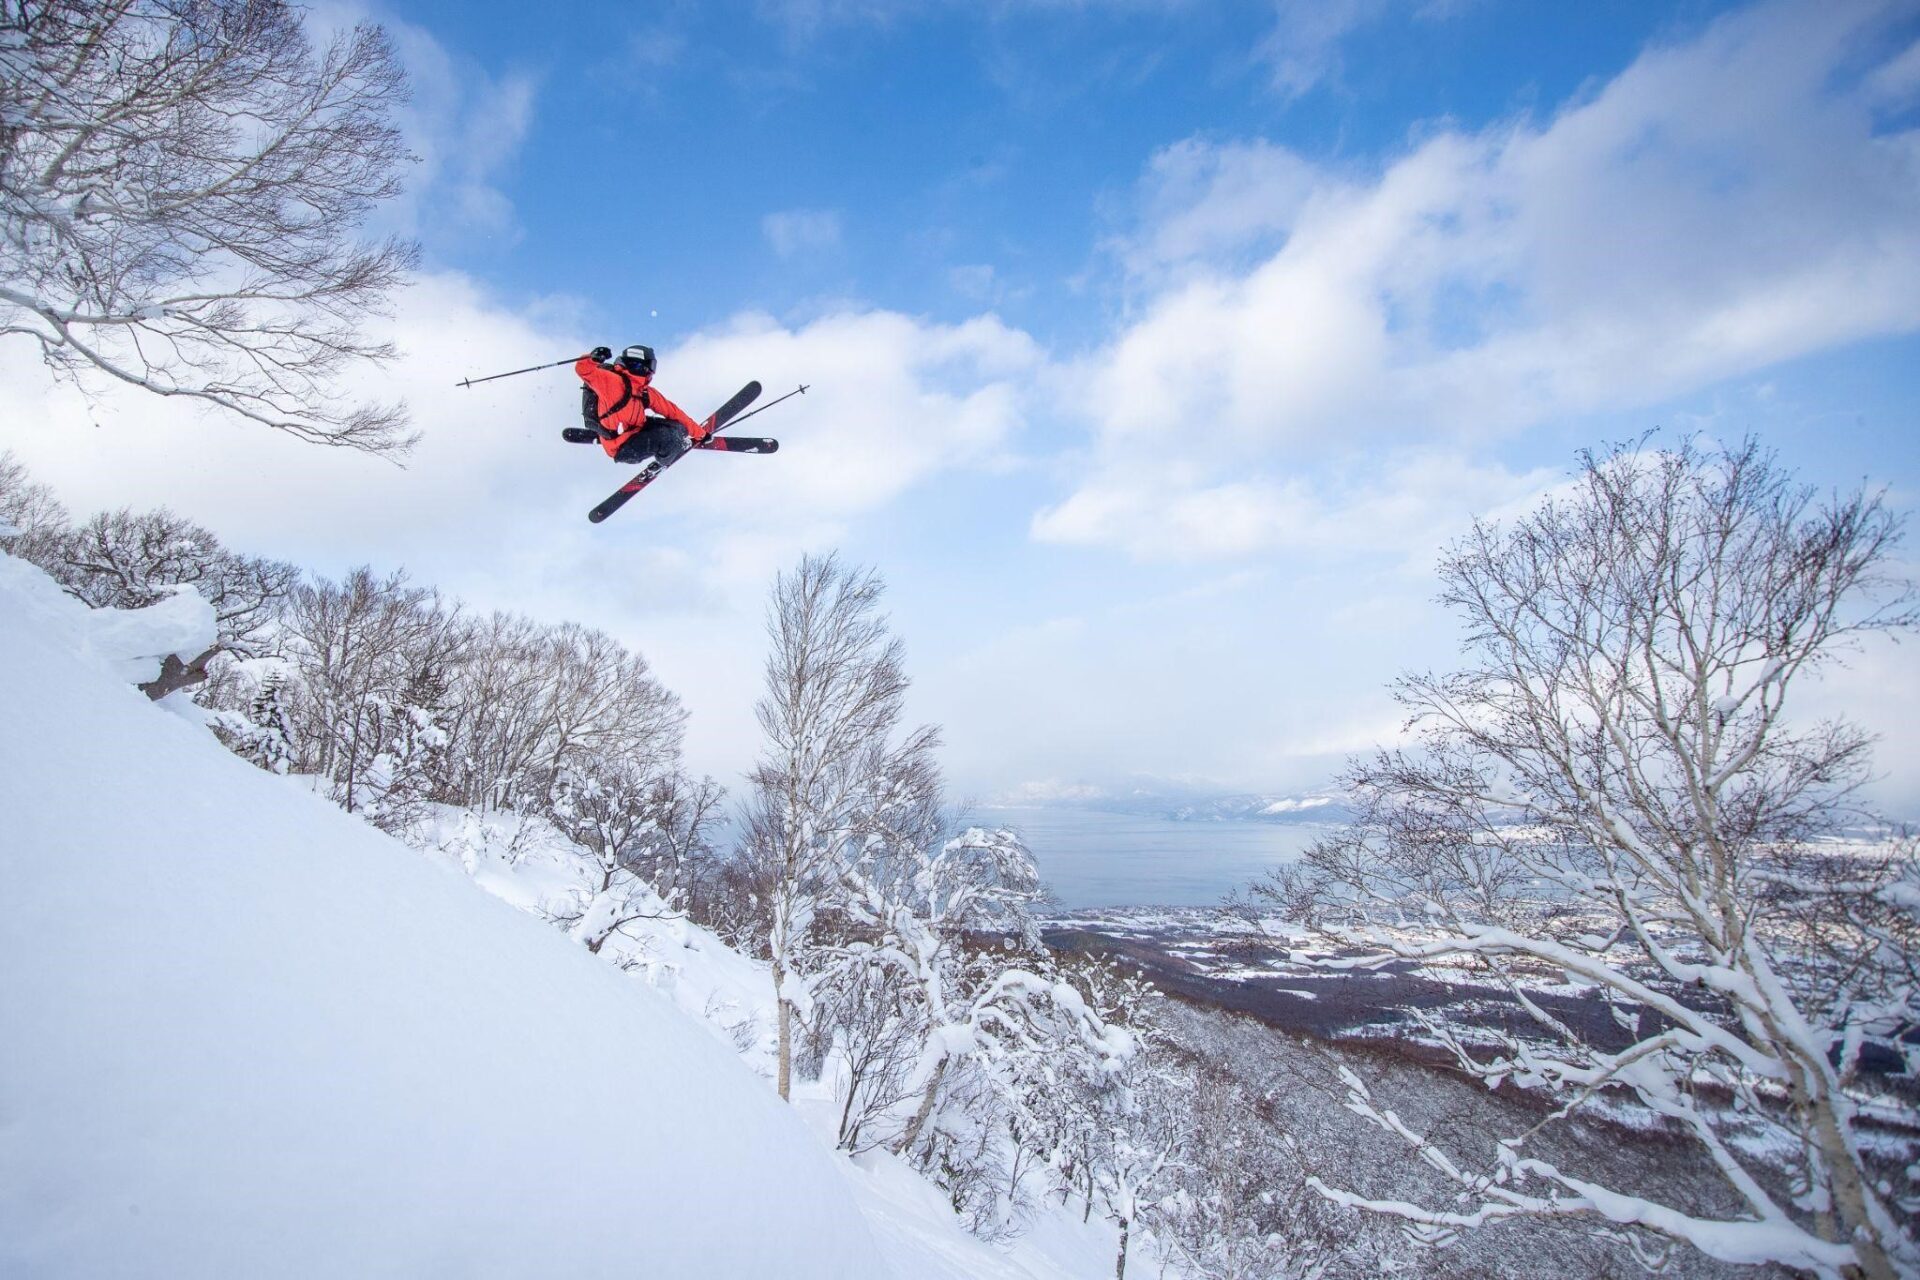 Emil Granbom skiing in Japan for the Head Skis team movie Unified